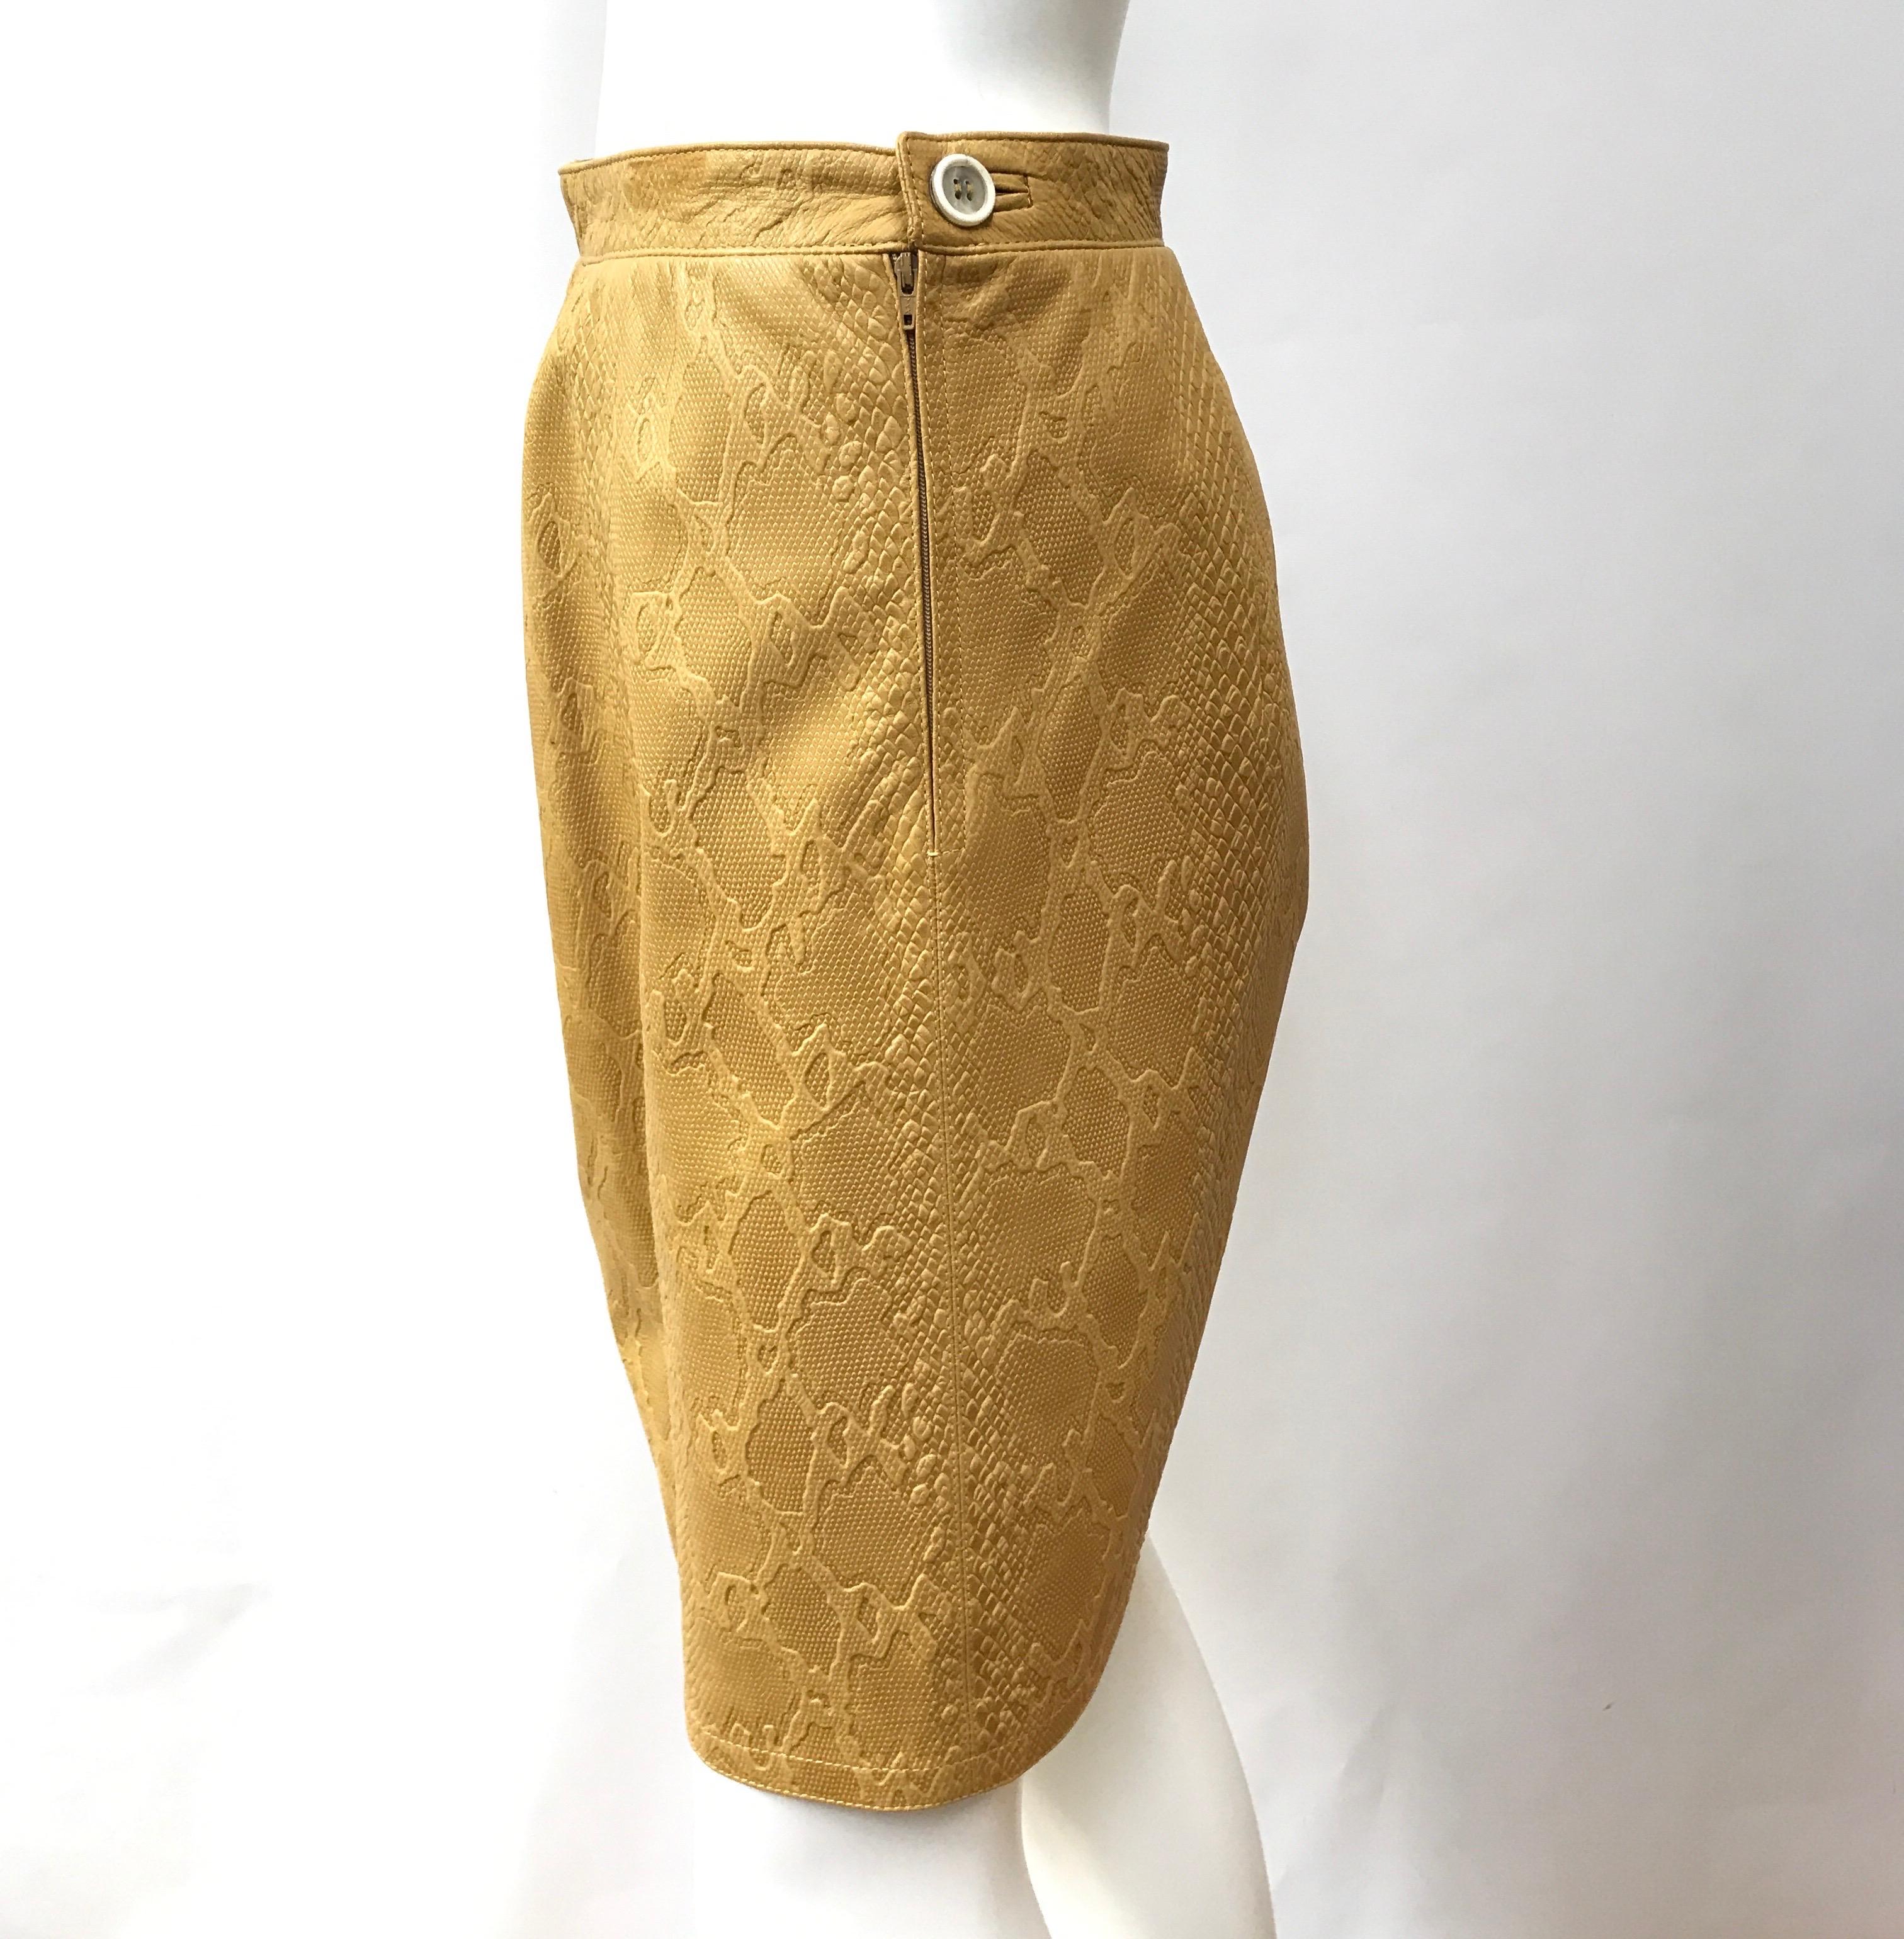 Valentino Boutique Camel Embossed leather skirt-4. This amazing Valentino Boutique skirt is in excellent condition. It is camel color and is an embossed leather throughout. There is a side zipper and fastened button, as shown in pictures. This skirt